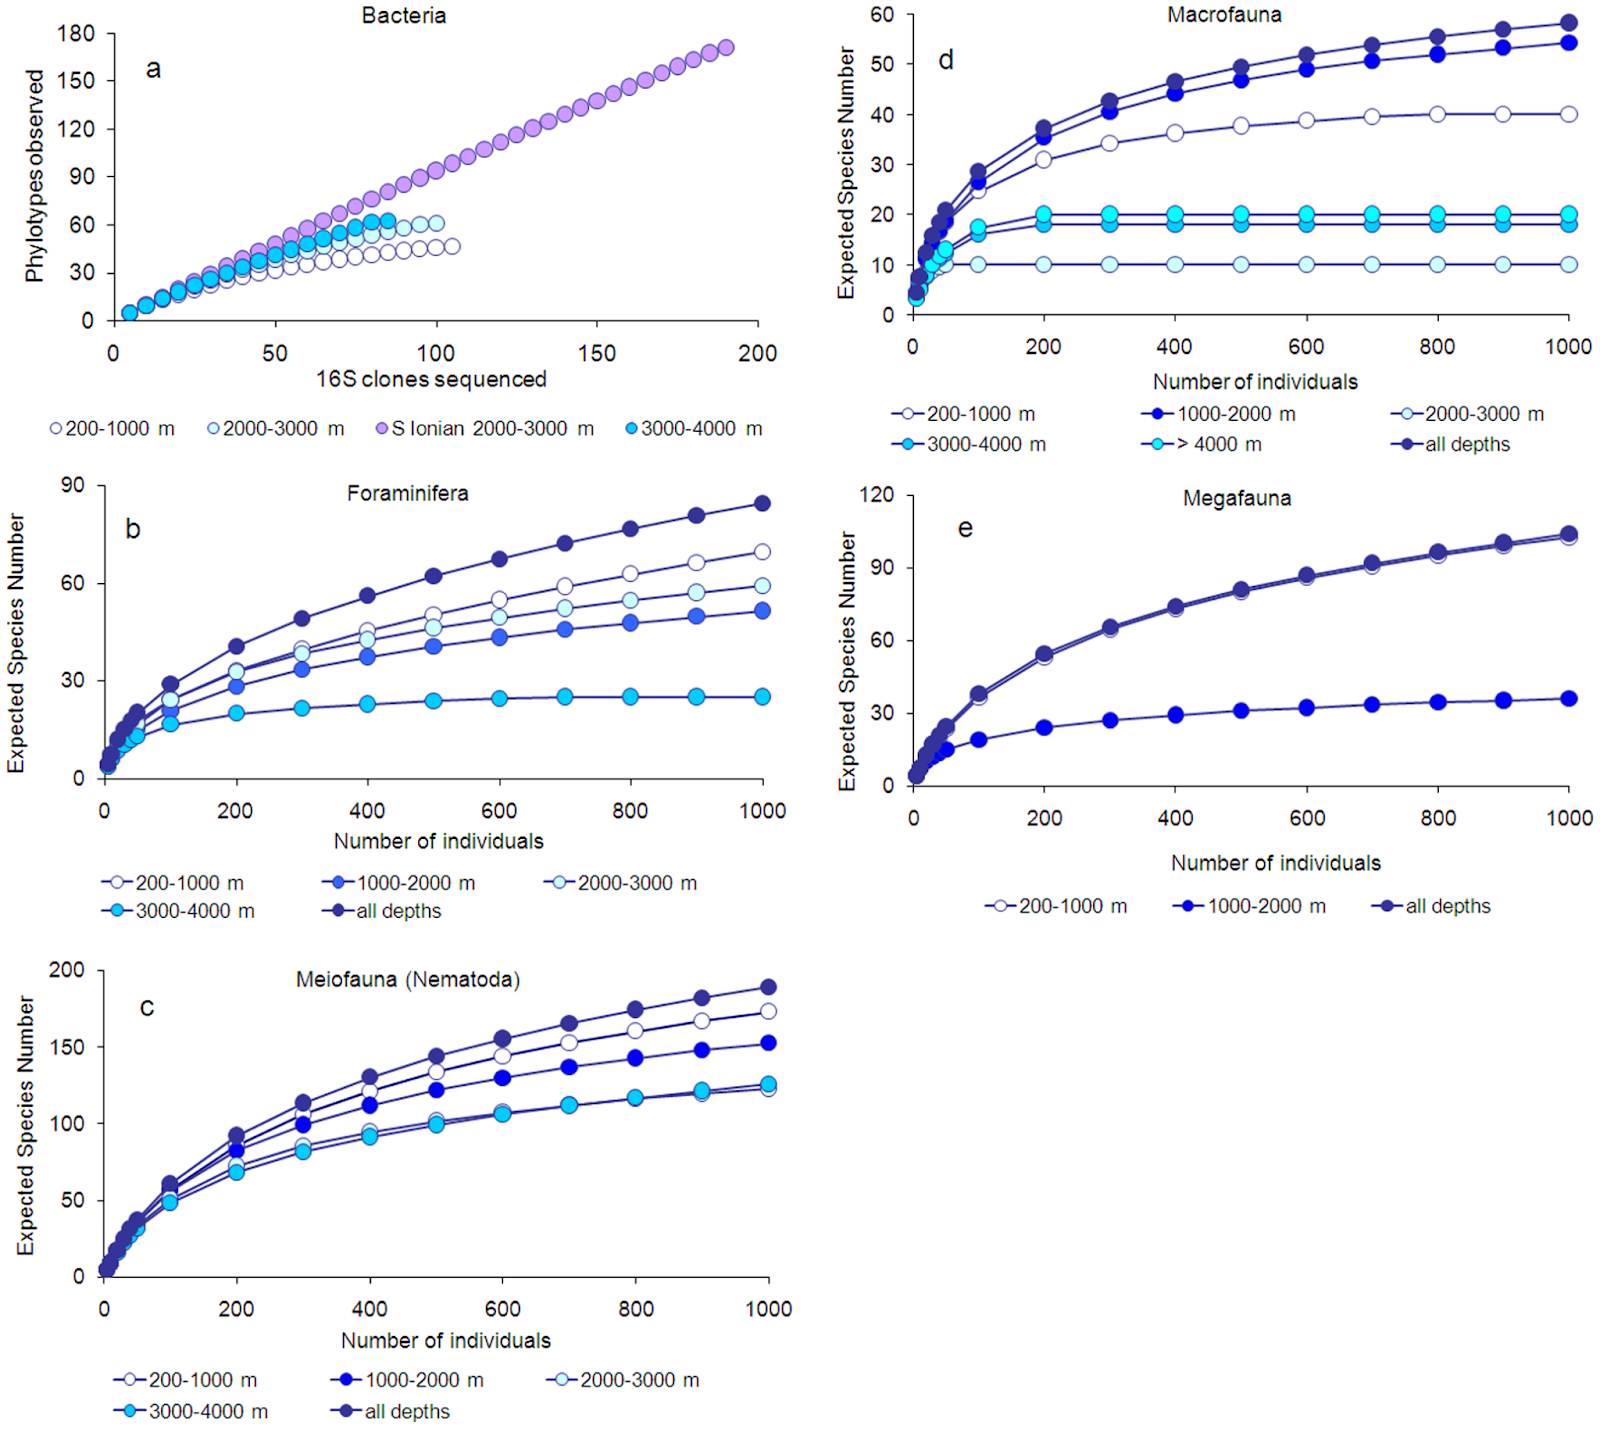 Five graphs show rarefaction curves for bacteria phylotypes observed, macrofauna expected species number, foraminifera expected species number, megafauna expected species number, and meiofauna expected species number. For all of the graphs, lower ocean depths have steeper curves with higher asymptotes than lower depths.